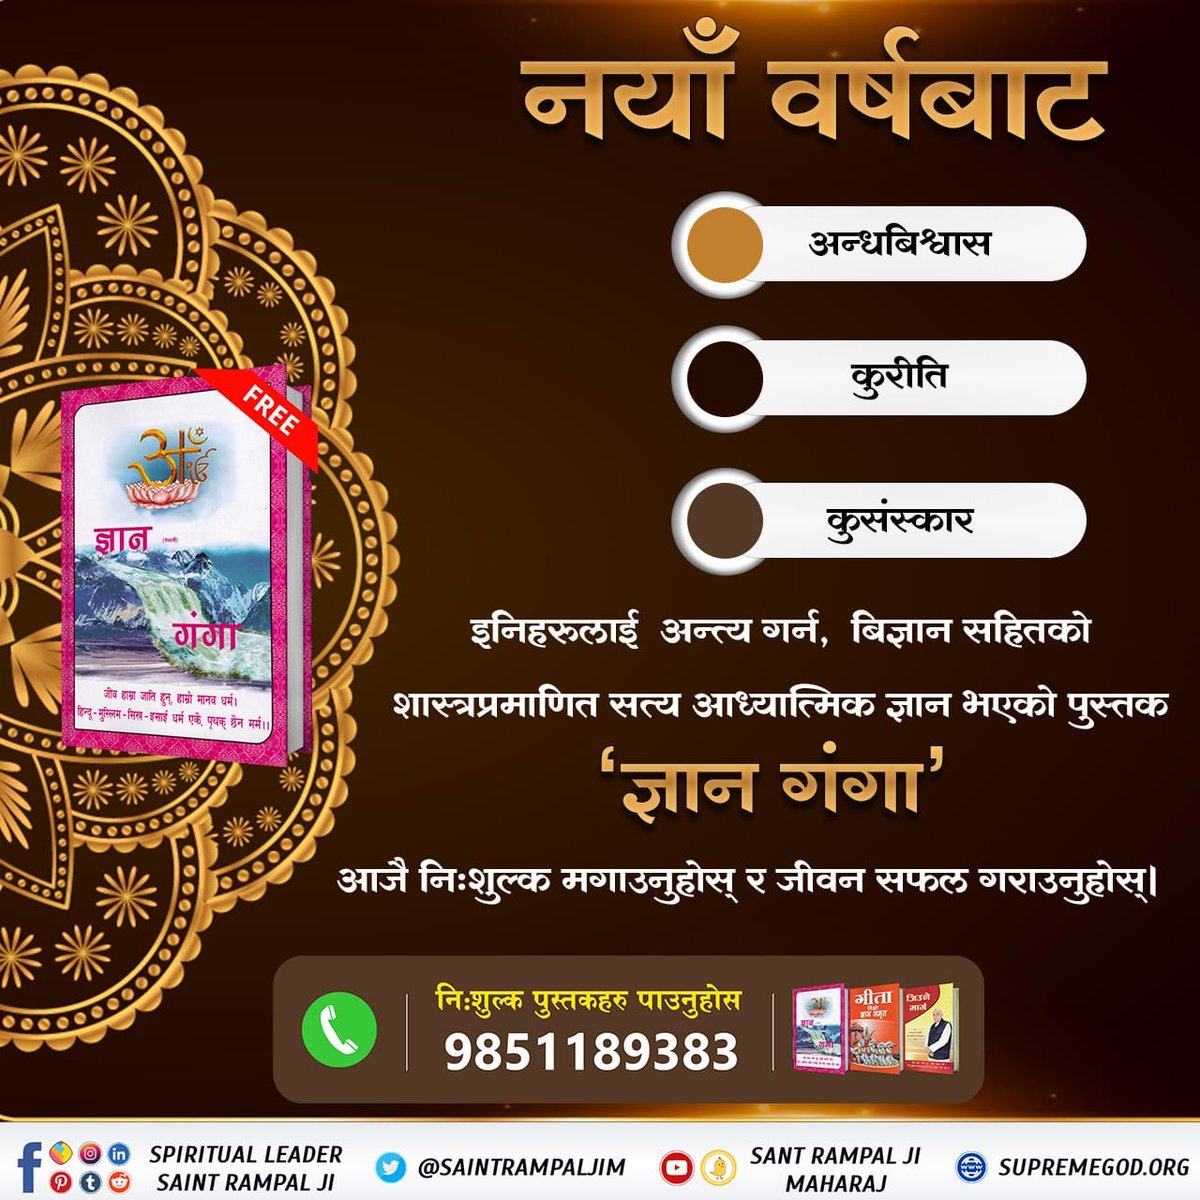 #नयाँवर्षमा_जीवनको_नयाँयात्रा To end superstitions, superstitions, bad customs from the new year, get the book 'Gyan Ganga' today free of charge with science-proven true spiritual knowledge and make your life successful. #GodMorningMonday